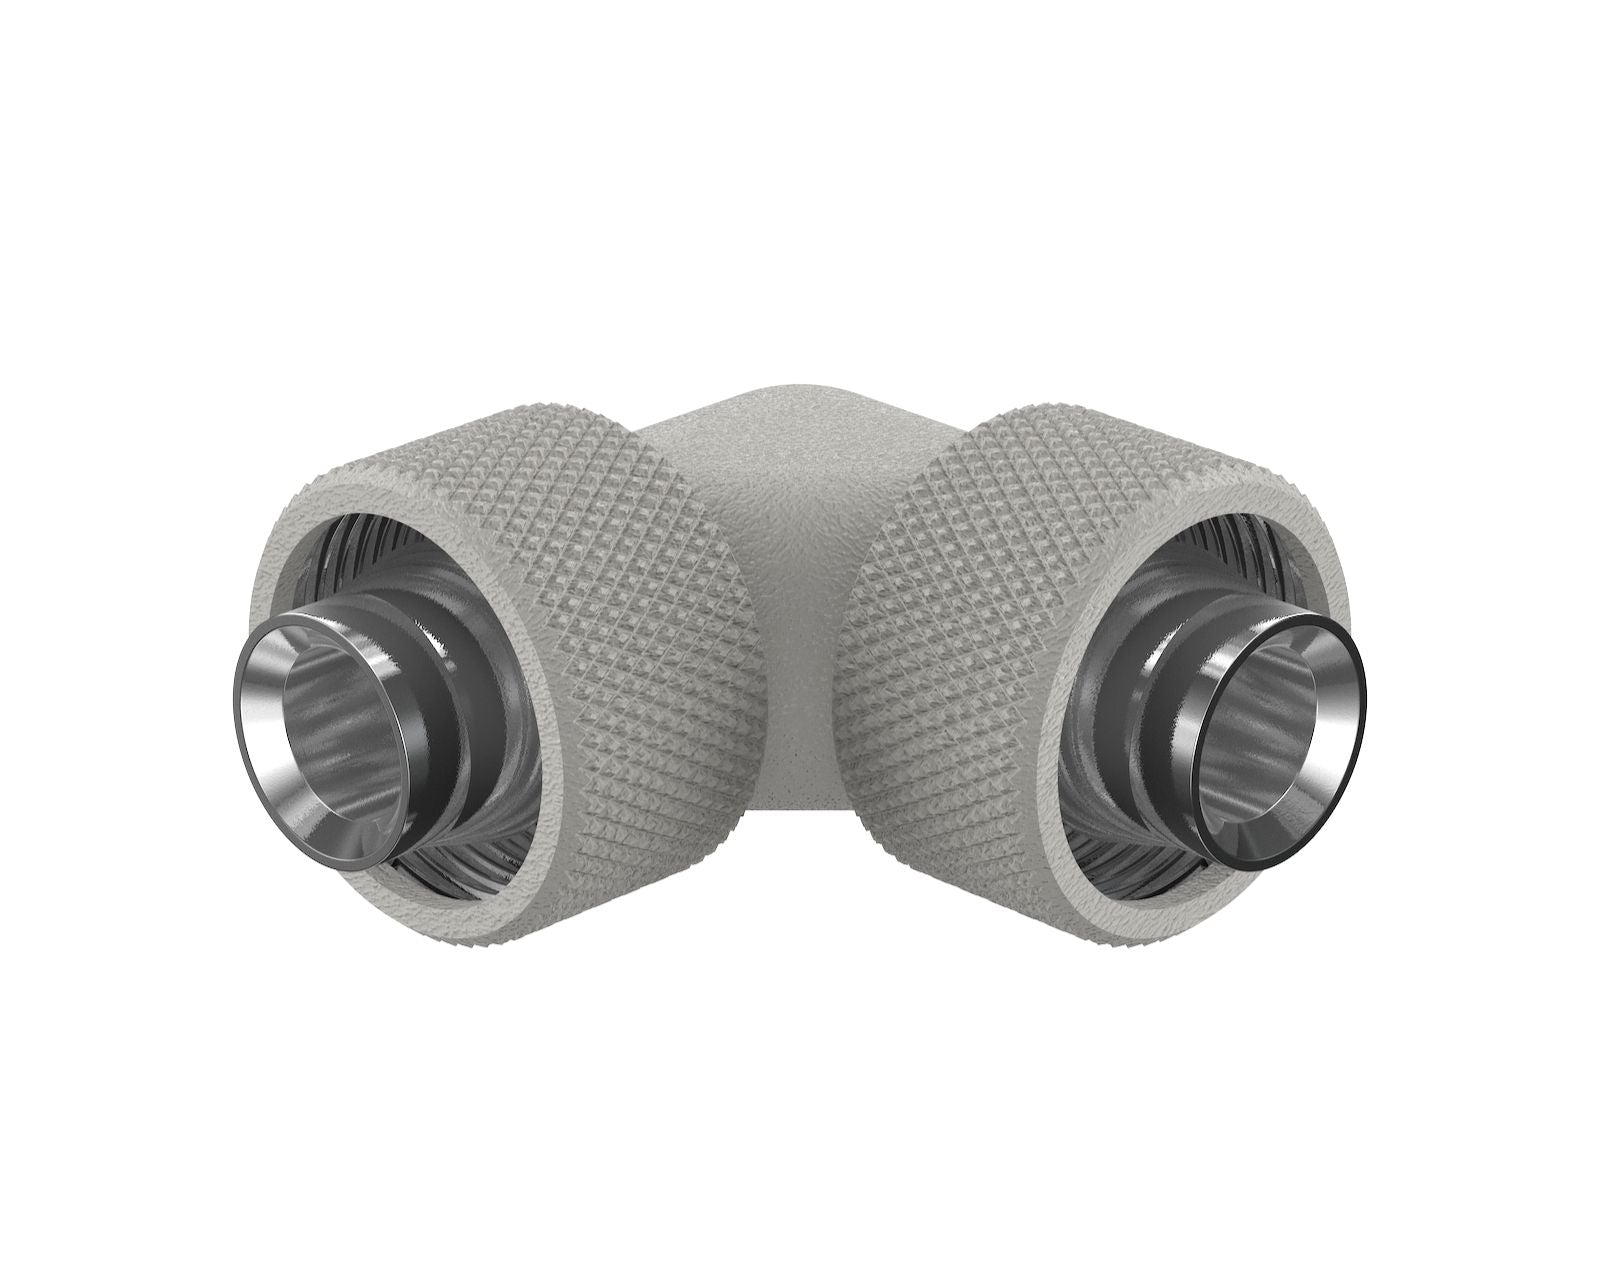 PrimoChill SecureFit SX - Premium 90 Degree Compression Fitting Set For 1/2in ID x 3/4in OD Flexible Tubing (F-SFSX3490) - Available in 20+ Colors, Custom Watercooling Loop Ready - TX Matte Silver